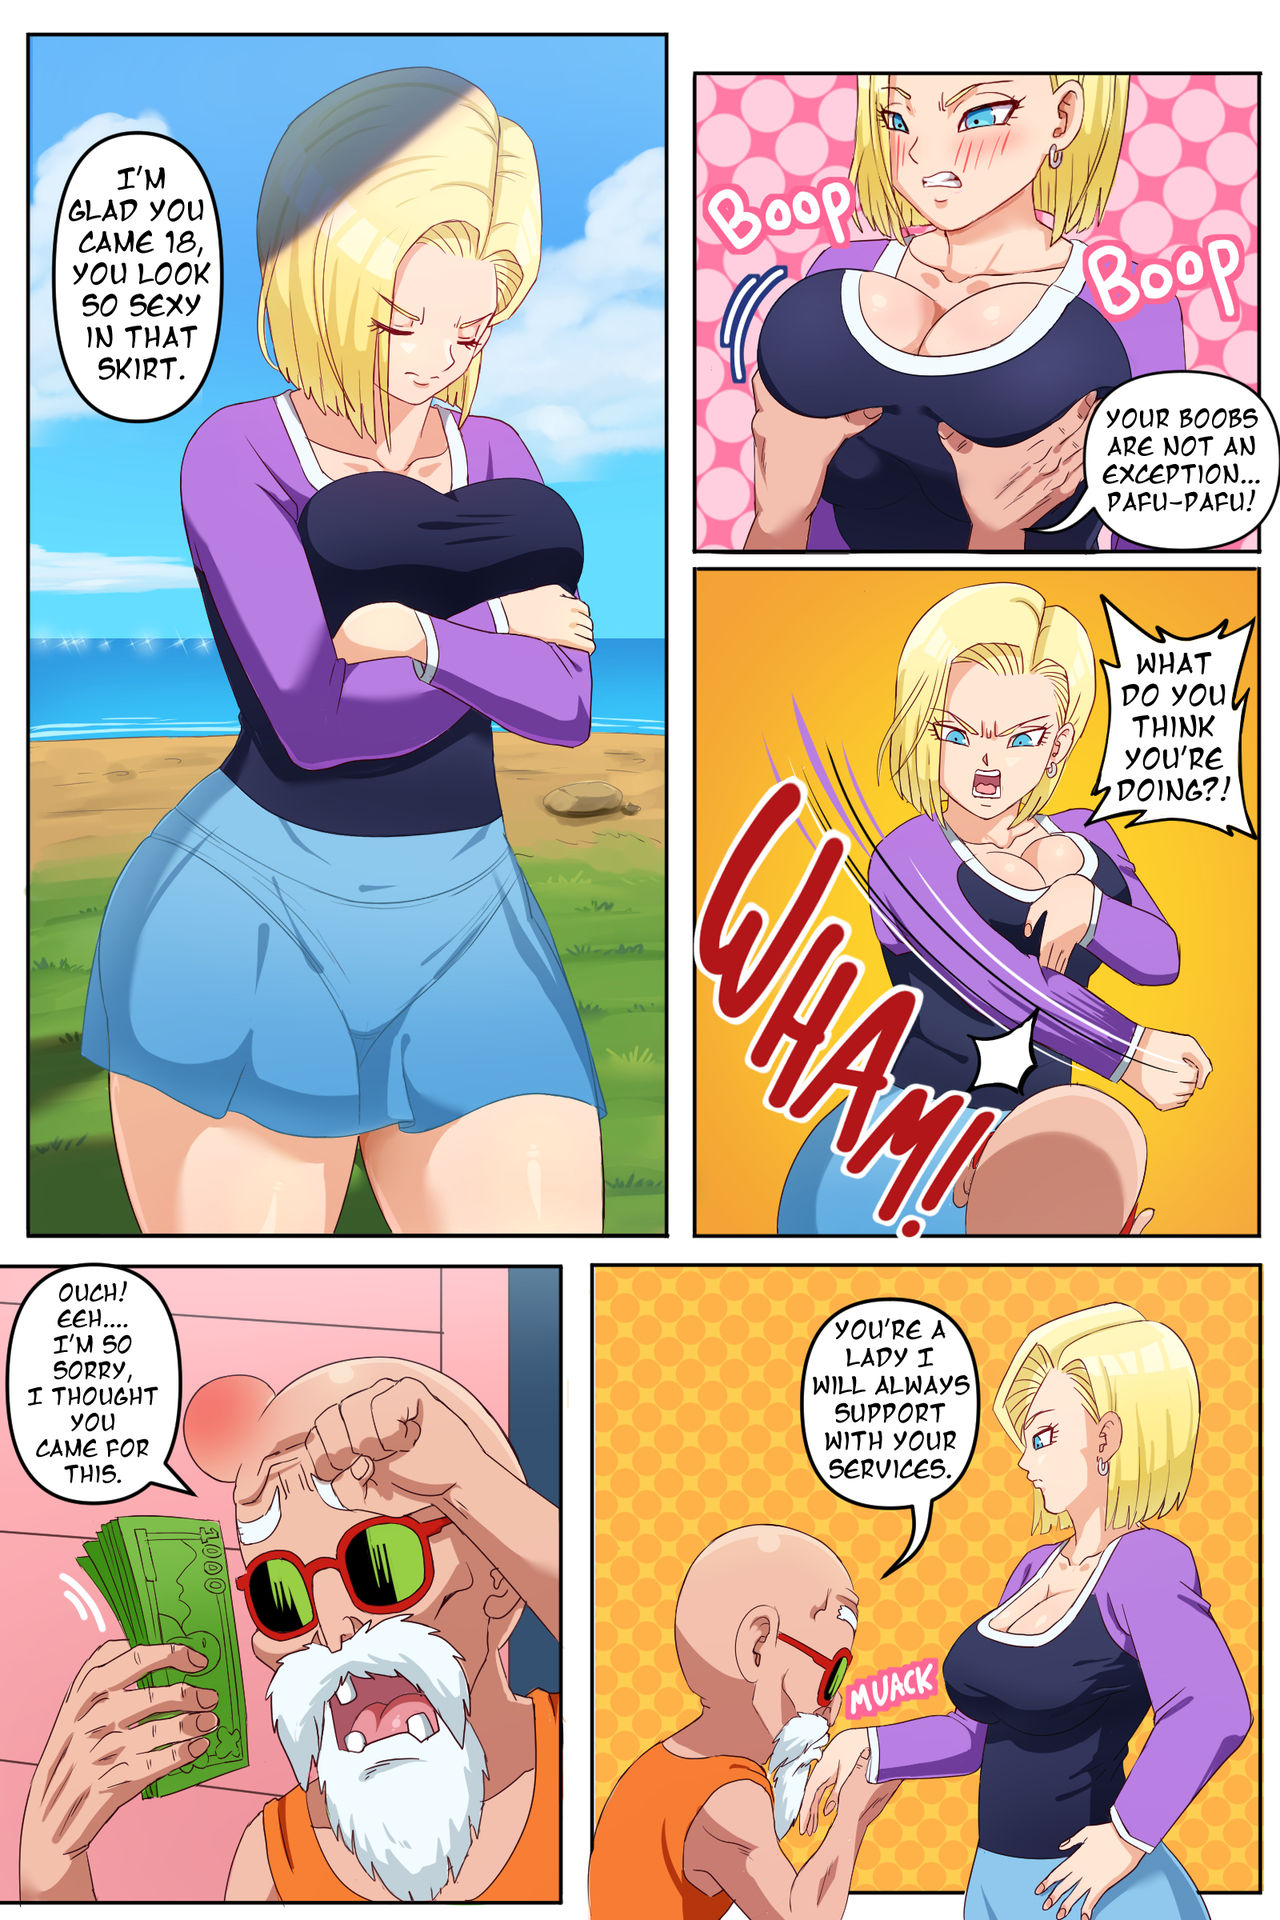 Android 18 Ntr Ep 1 Pinkpawg 03